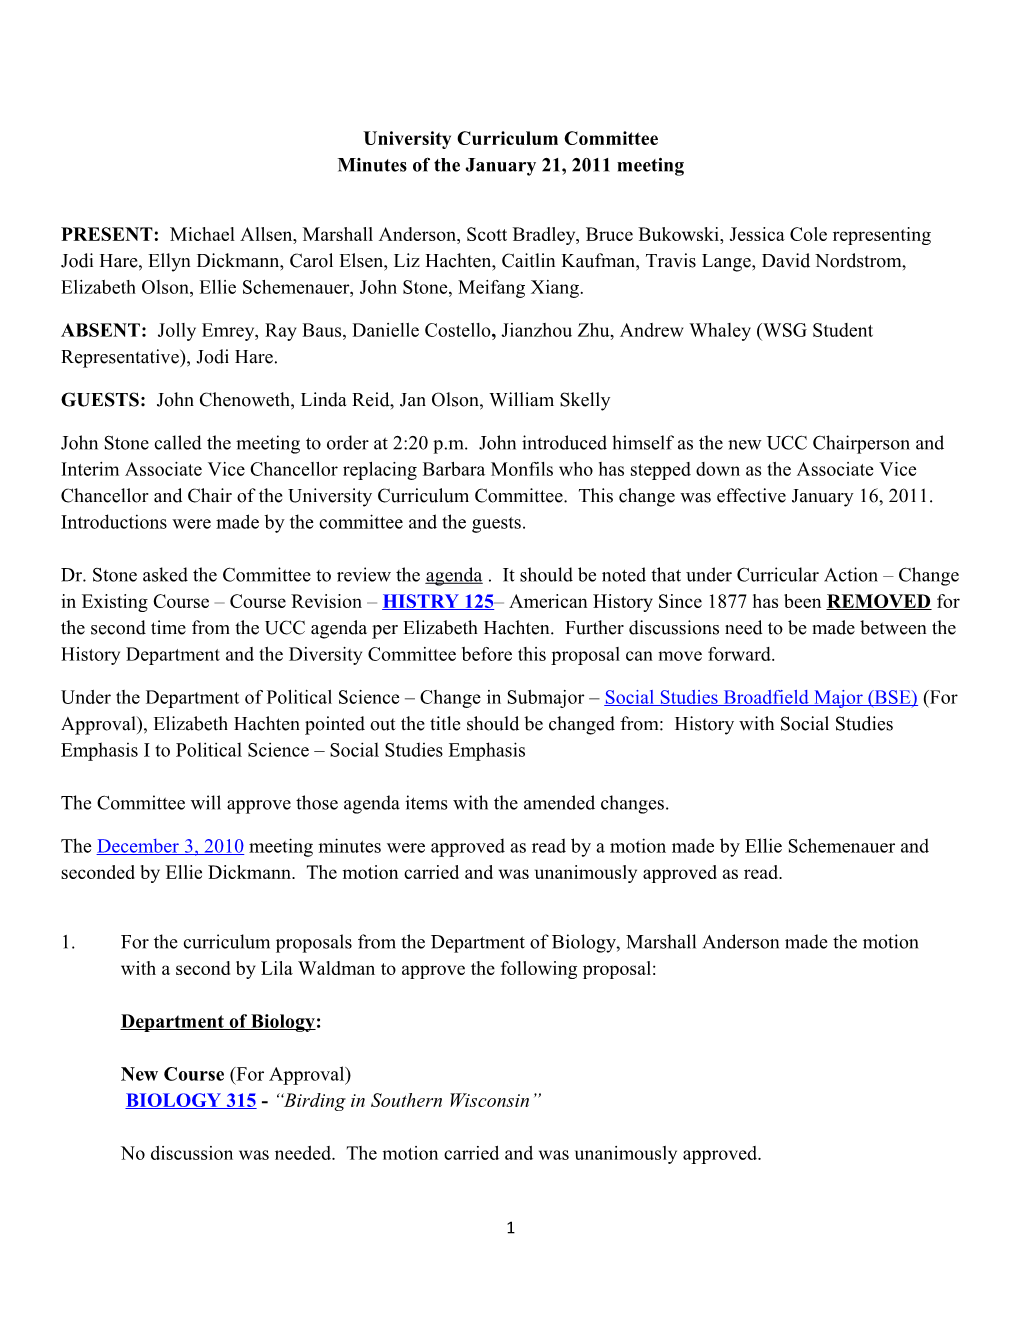 University Curriculum Committee Minutes of the January 21, 2011 Meeting